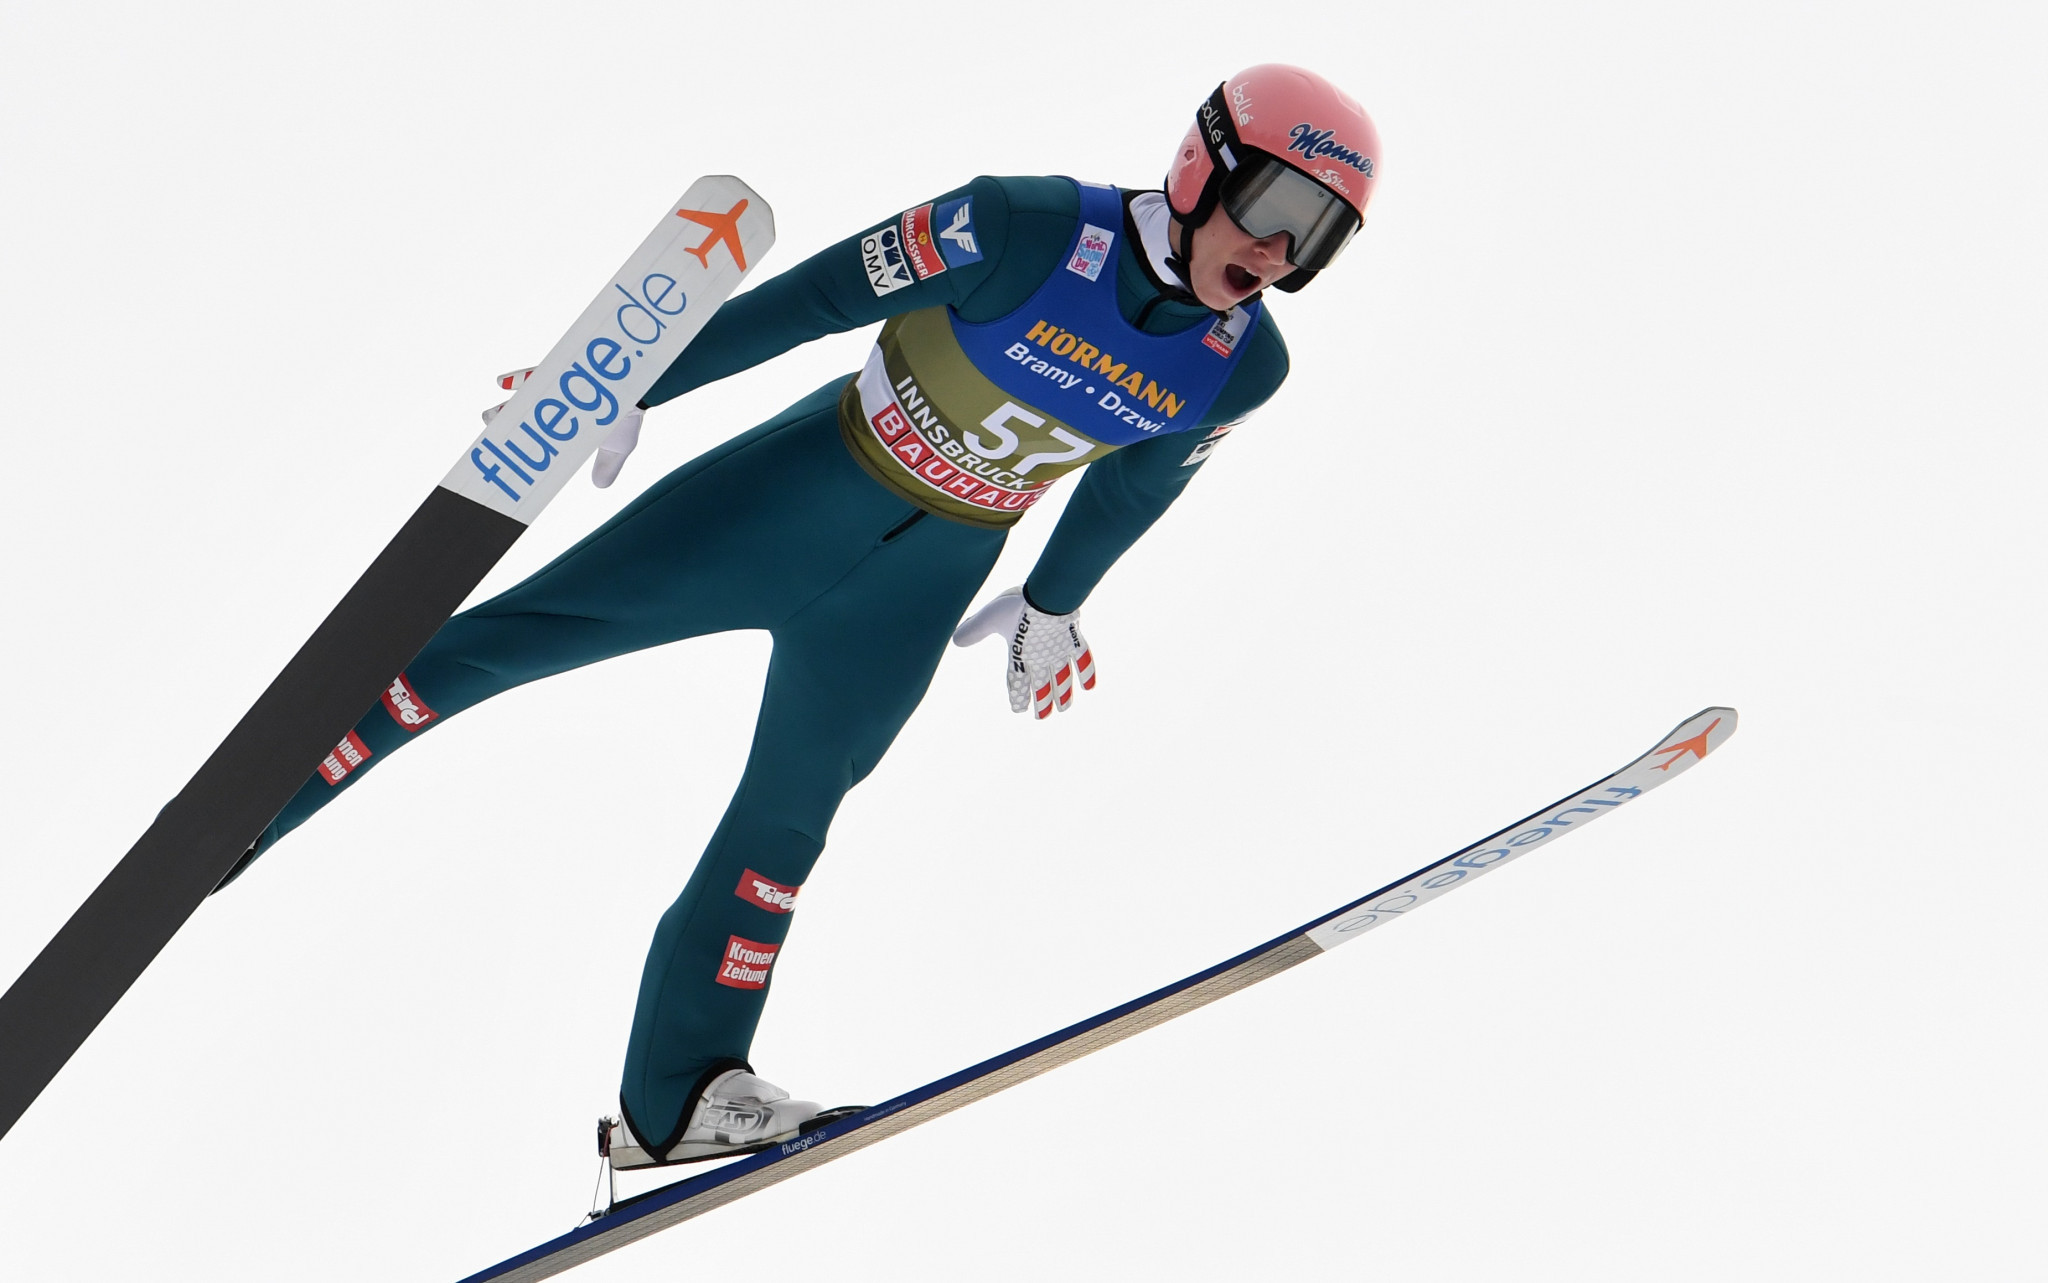 Austria edge out Germany to win men’s team title at Wisla Ski Jumping World Cup